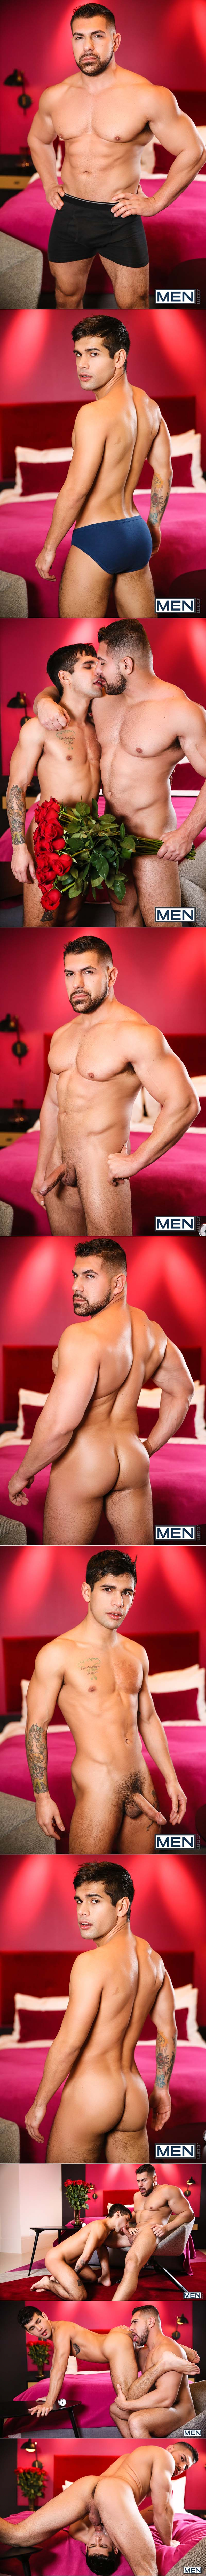 He Calls To Me (Damien Stone Fucks Ty Mitchell) at MEN